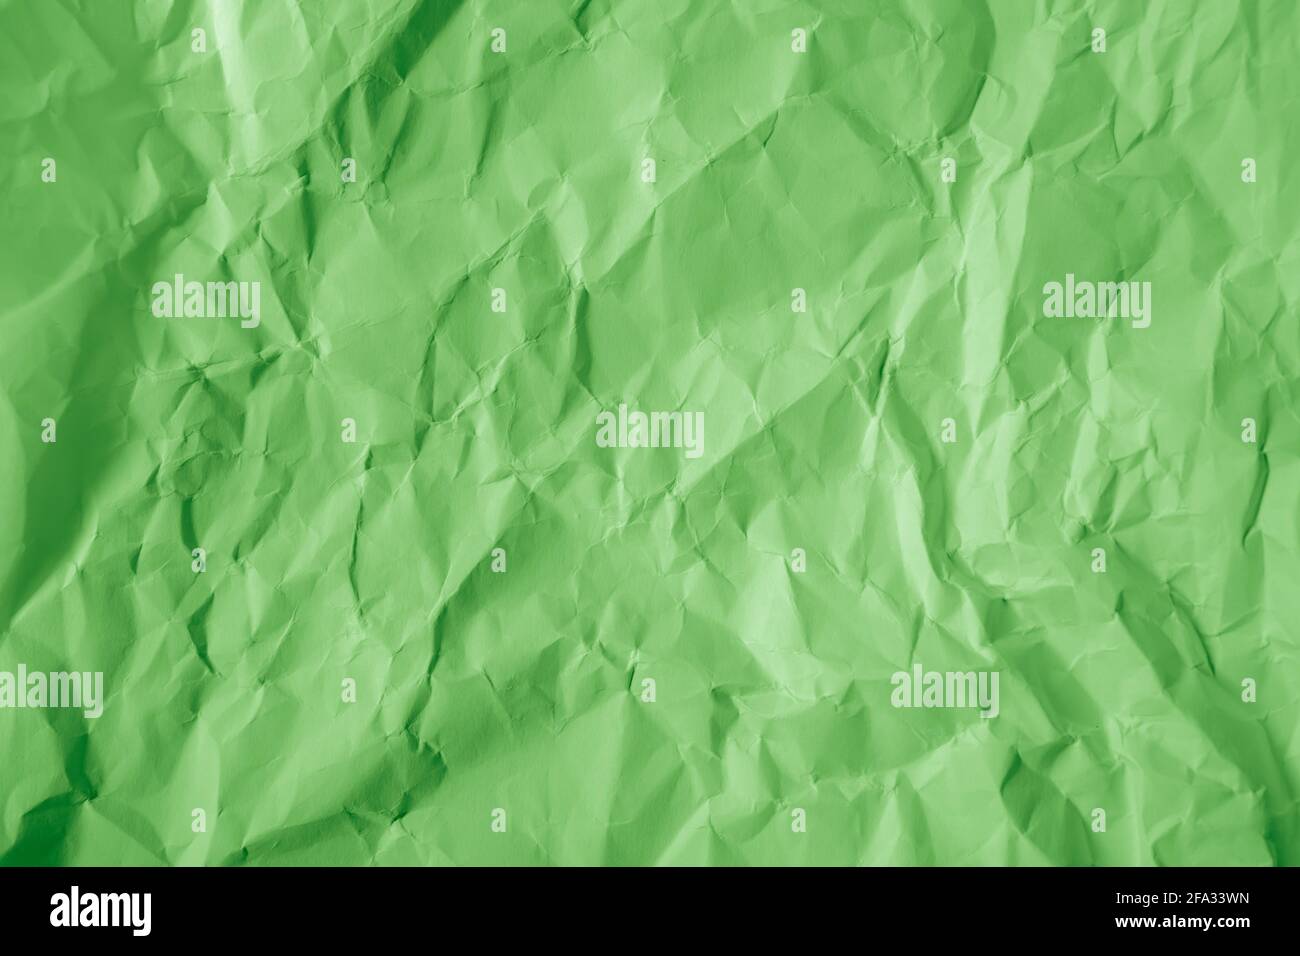 Crumpled green paper texture background Stock Photo